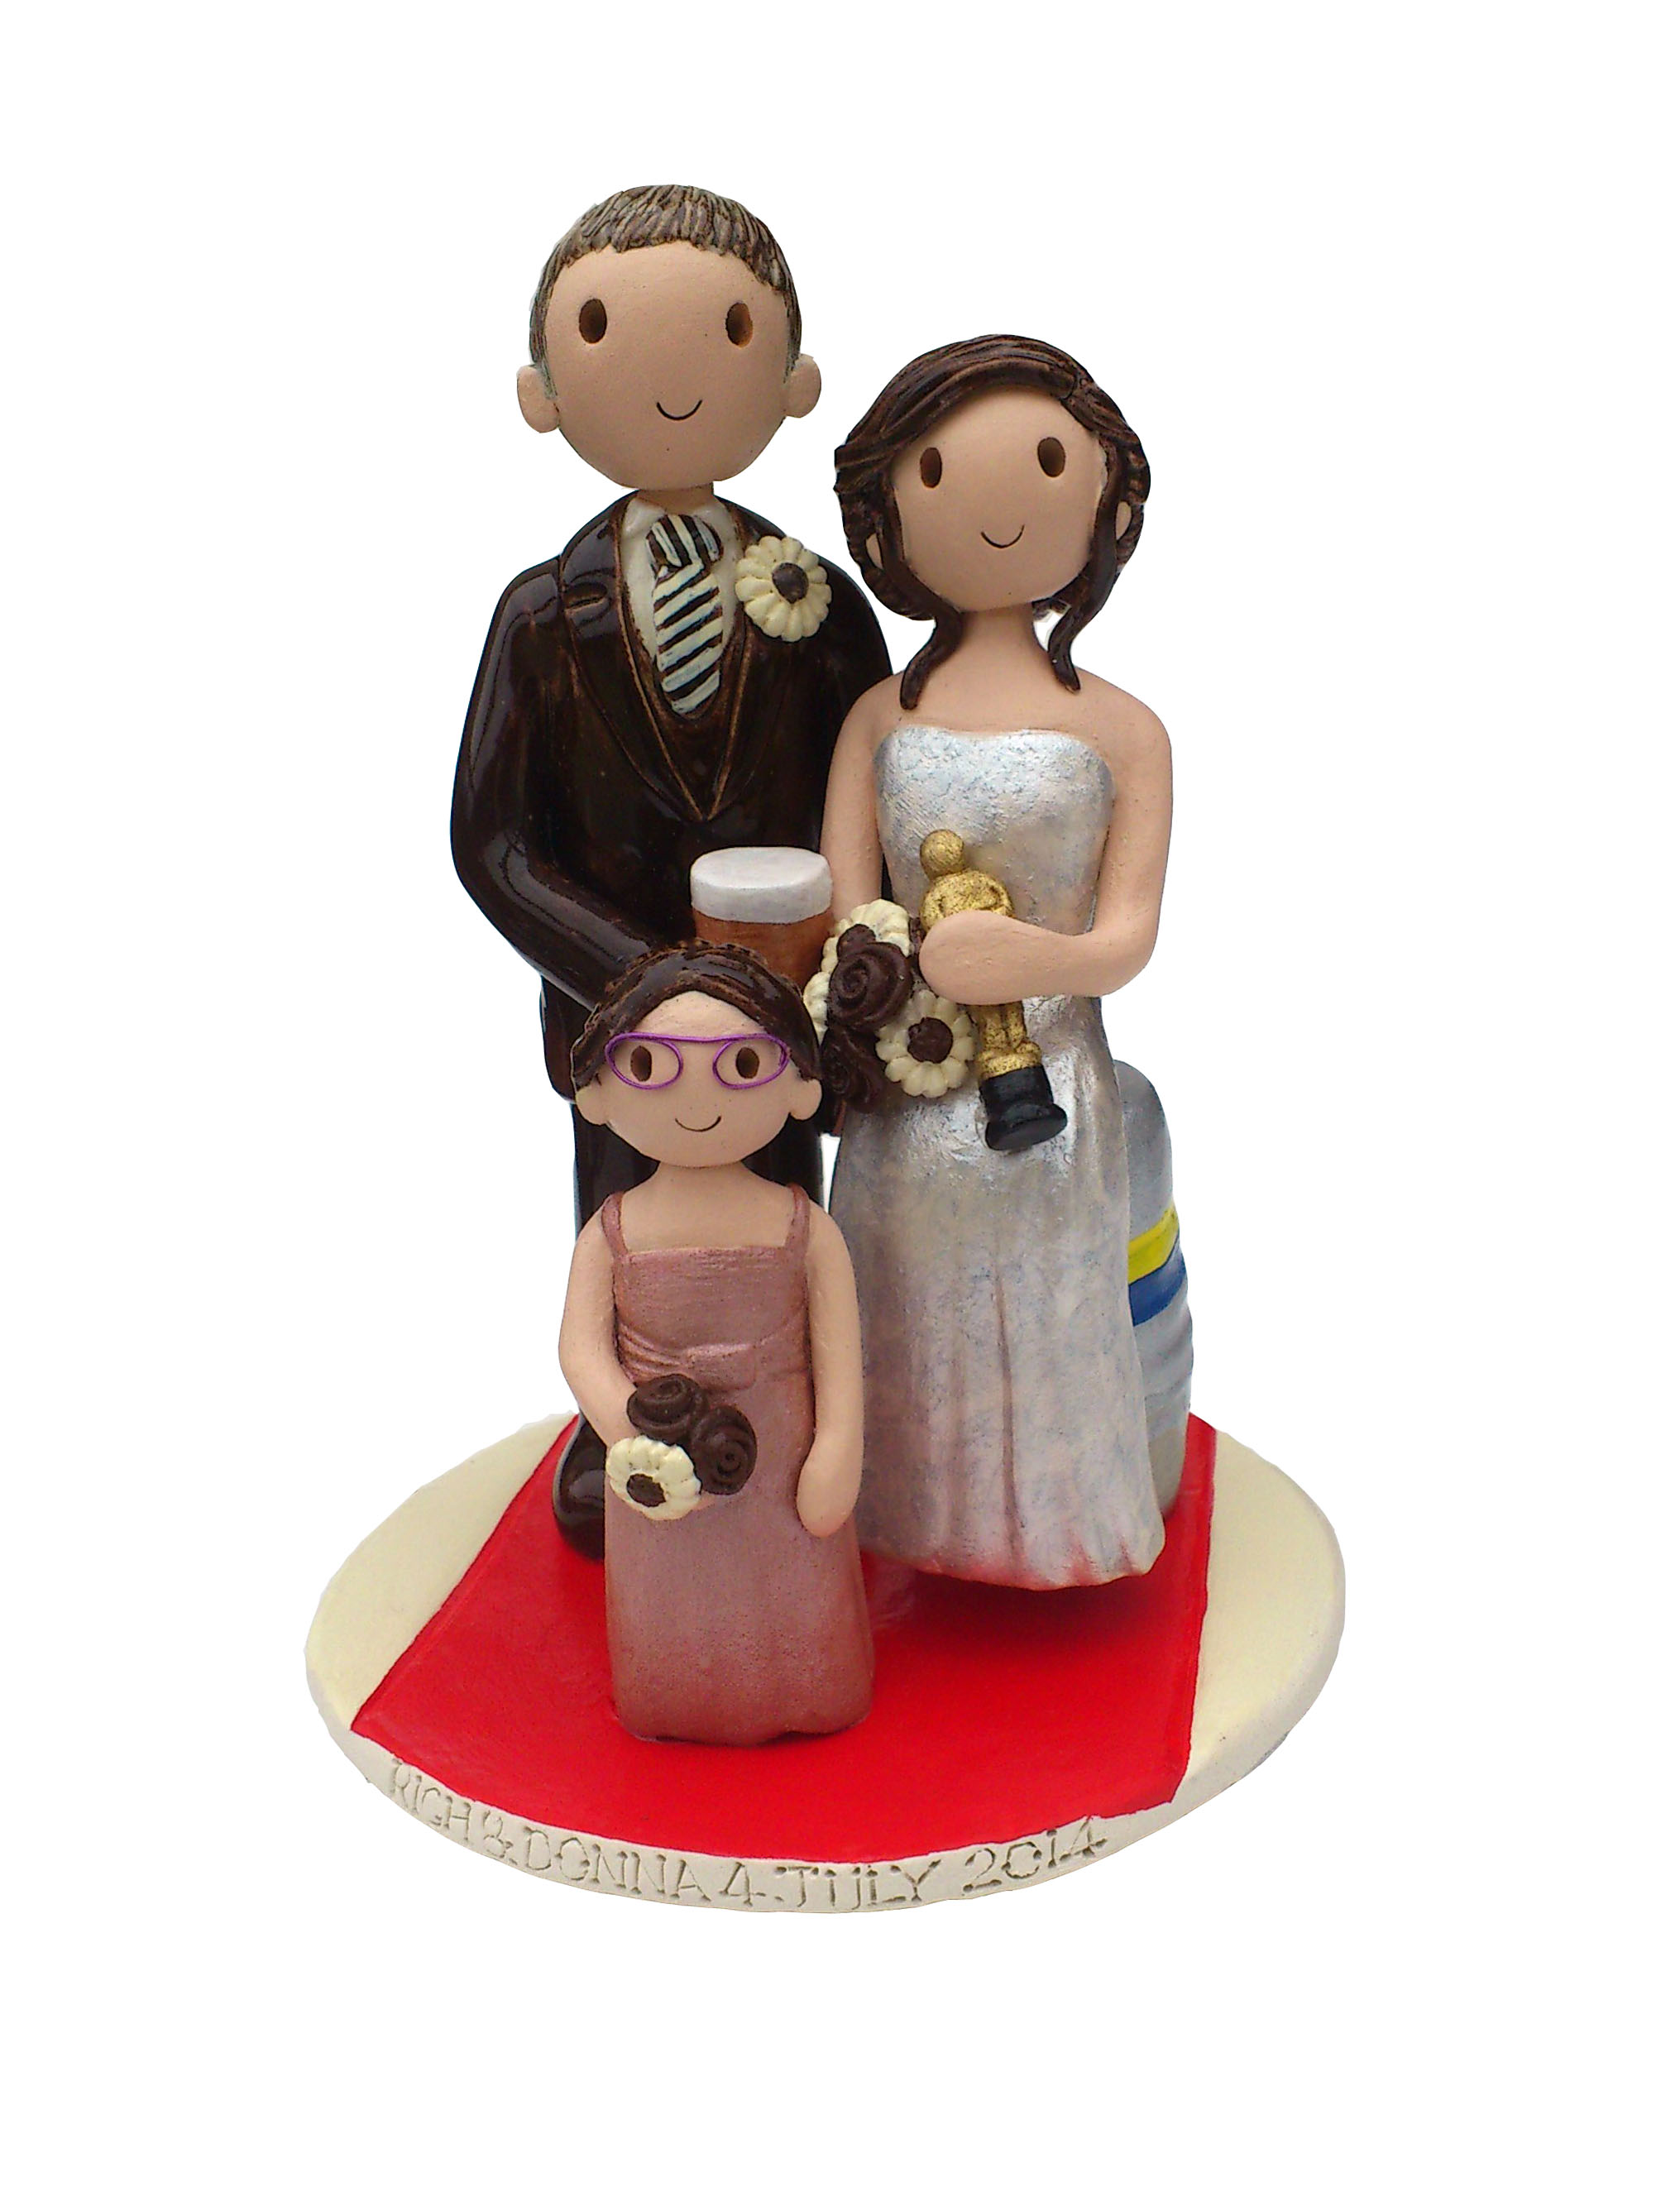  Wedding  Cake  Toppers  Gallery Examples Of Toppers  We Have 